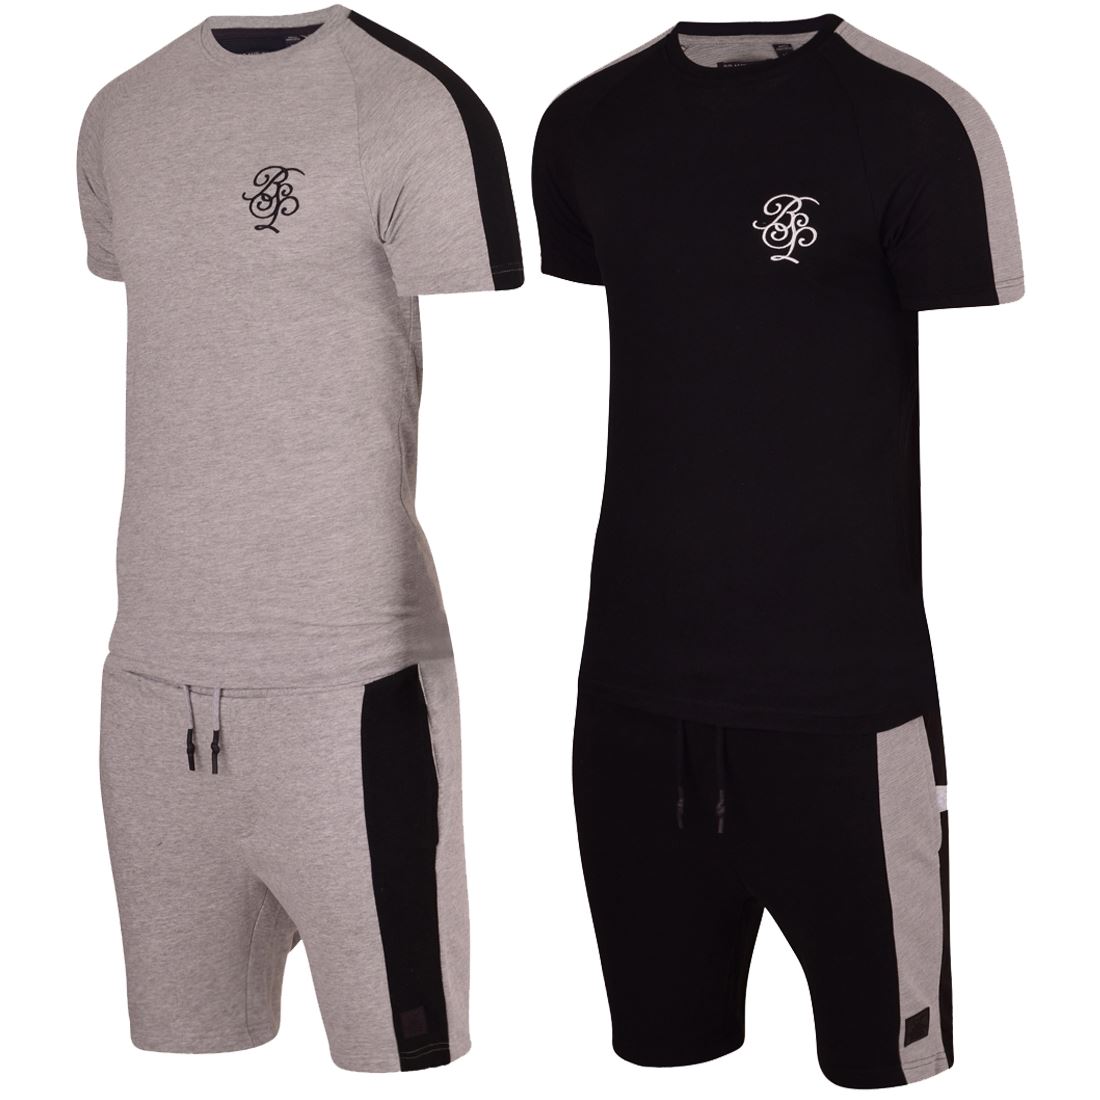 Mens Cotton T Shirt Fleece Shorts Set Summer Tracksuit Gym Holiday Outfit